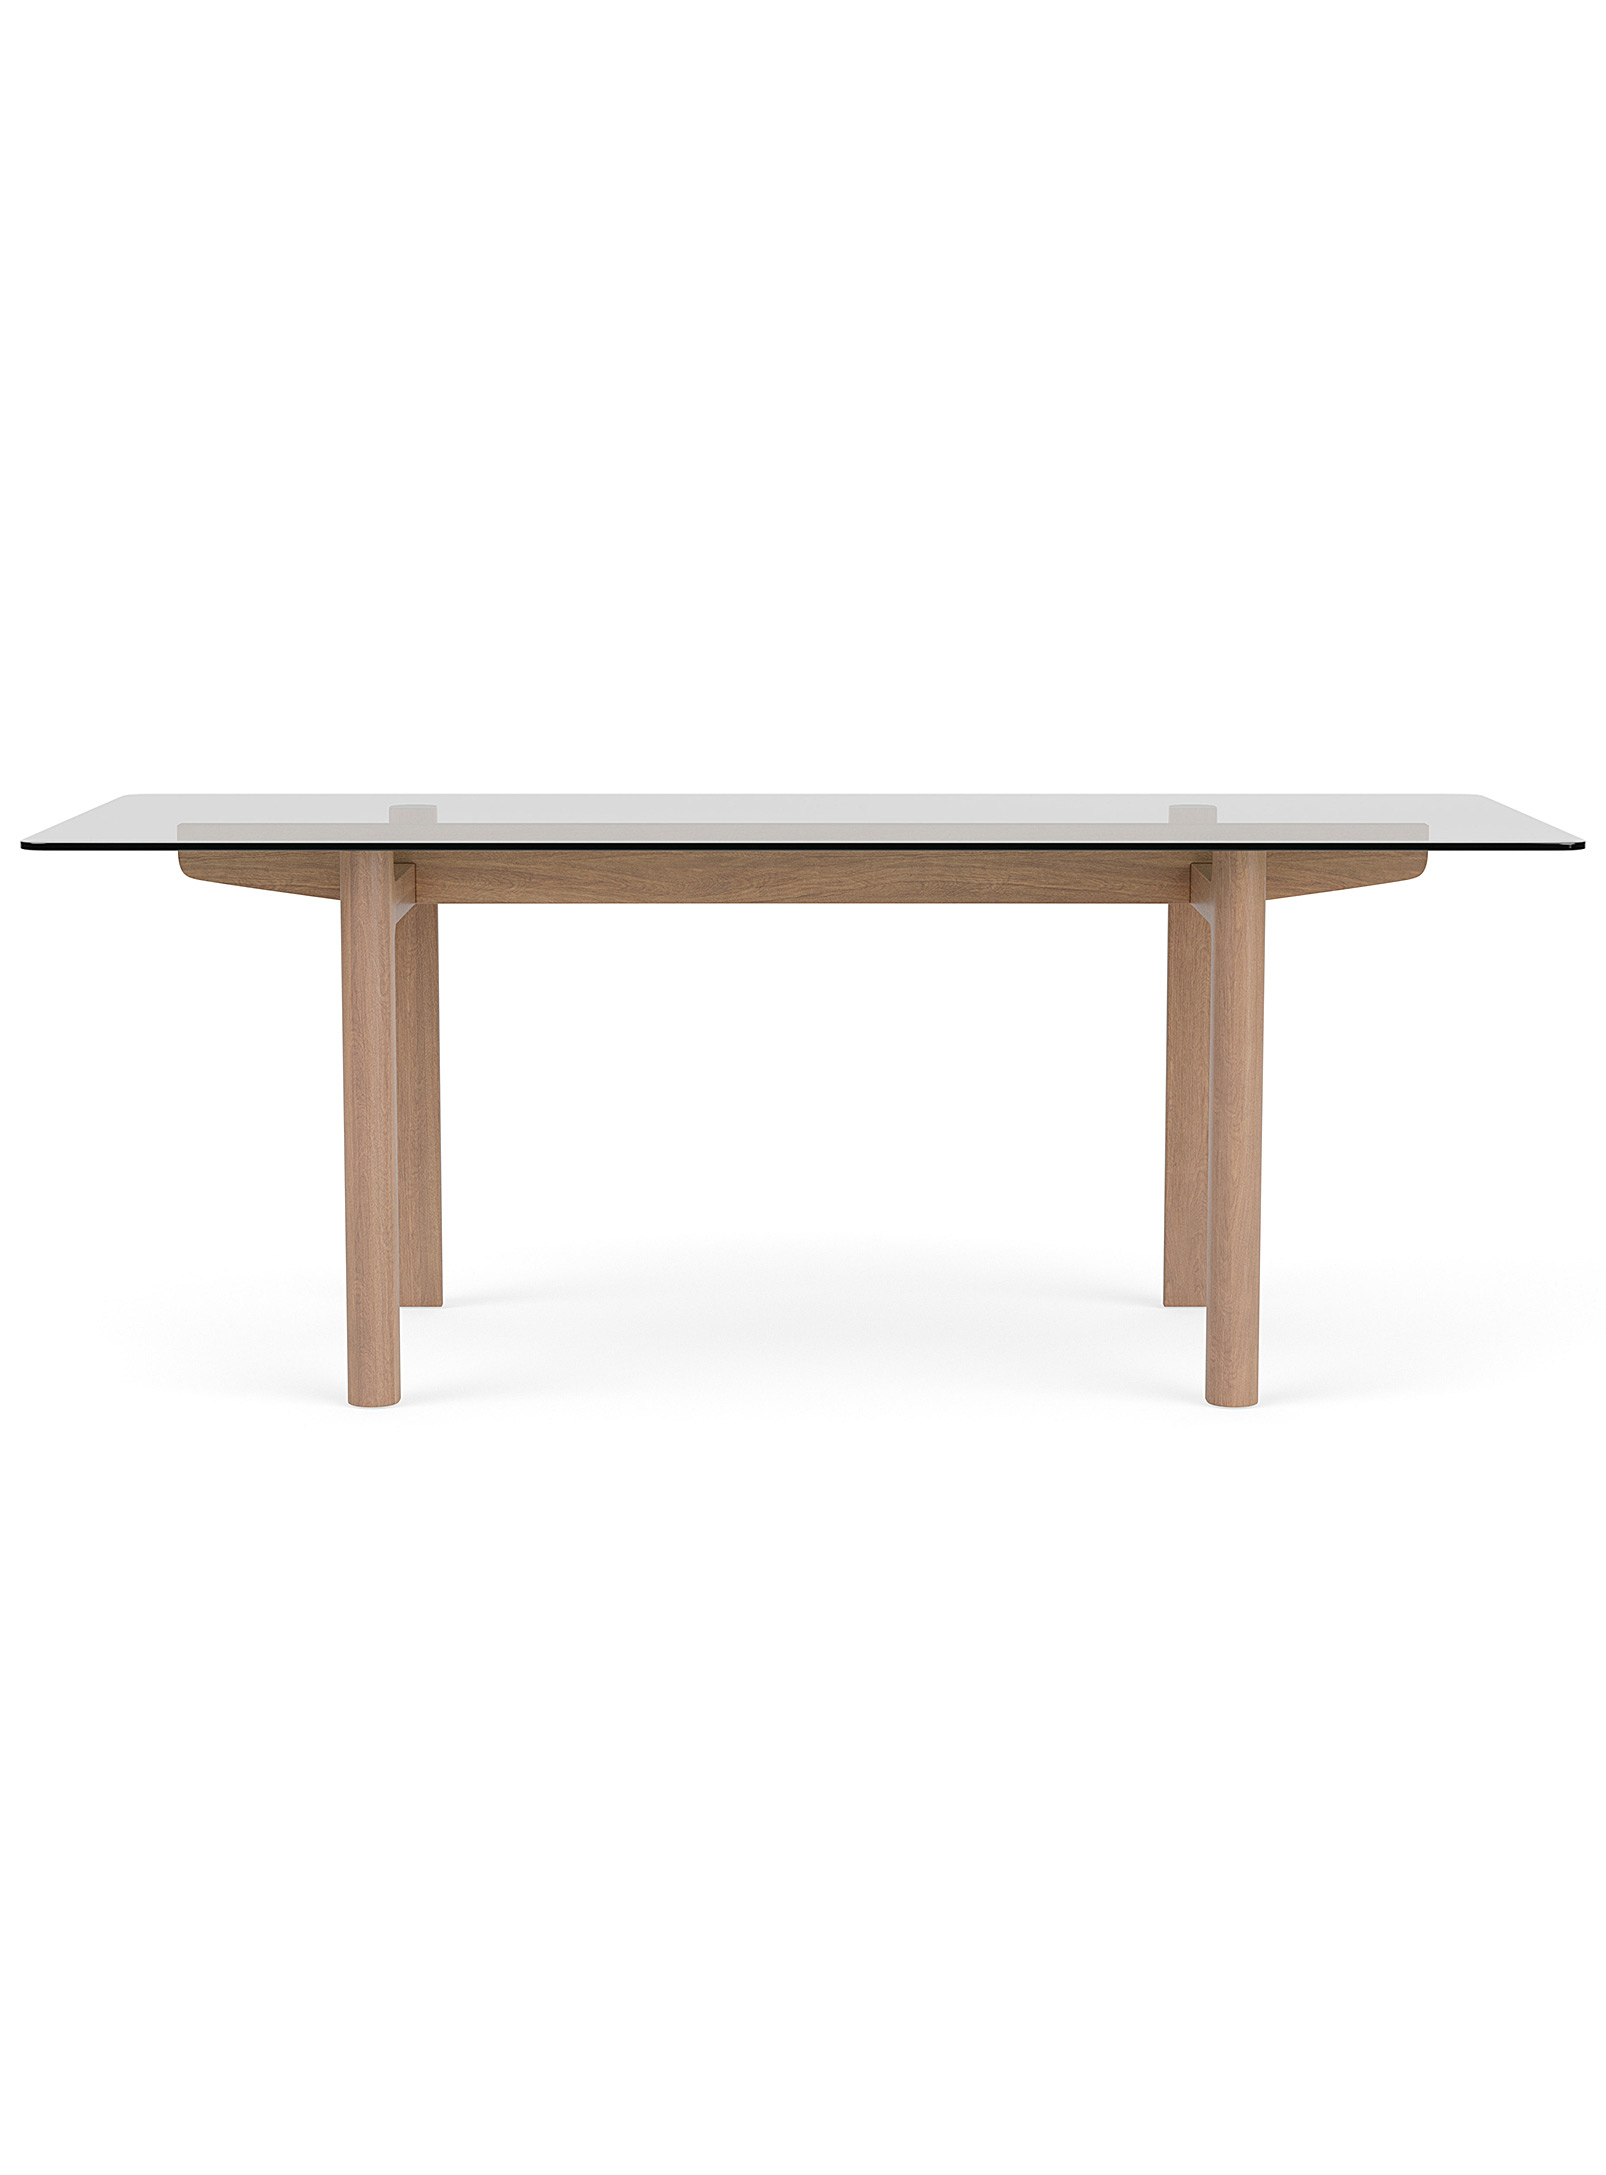 EQ3 - Airy architecture dining table Seats 6 to 8 people